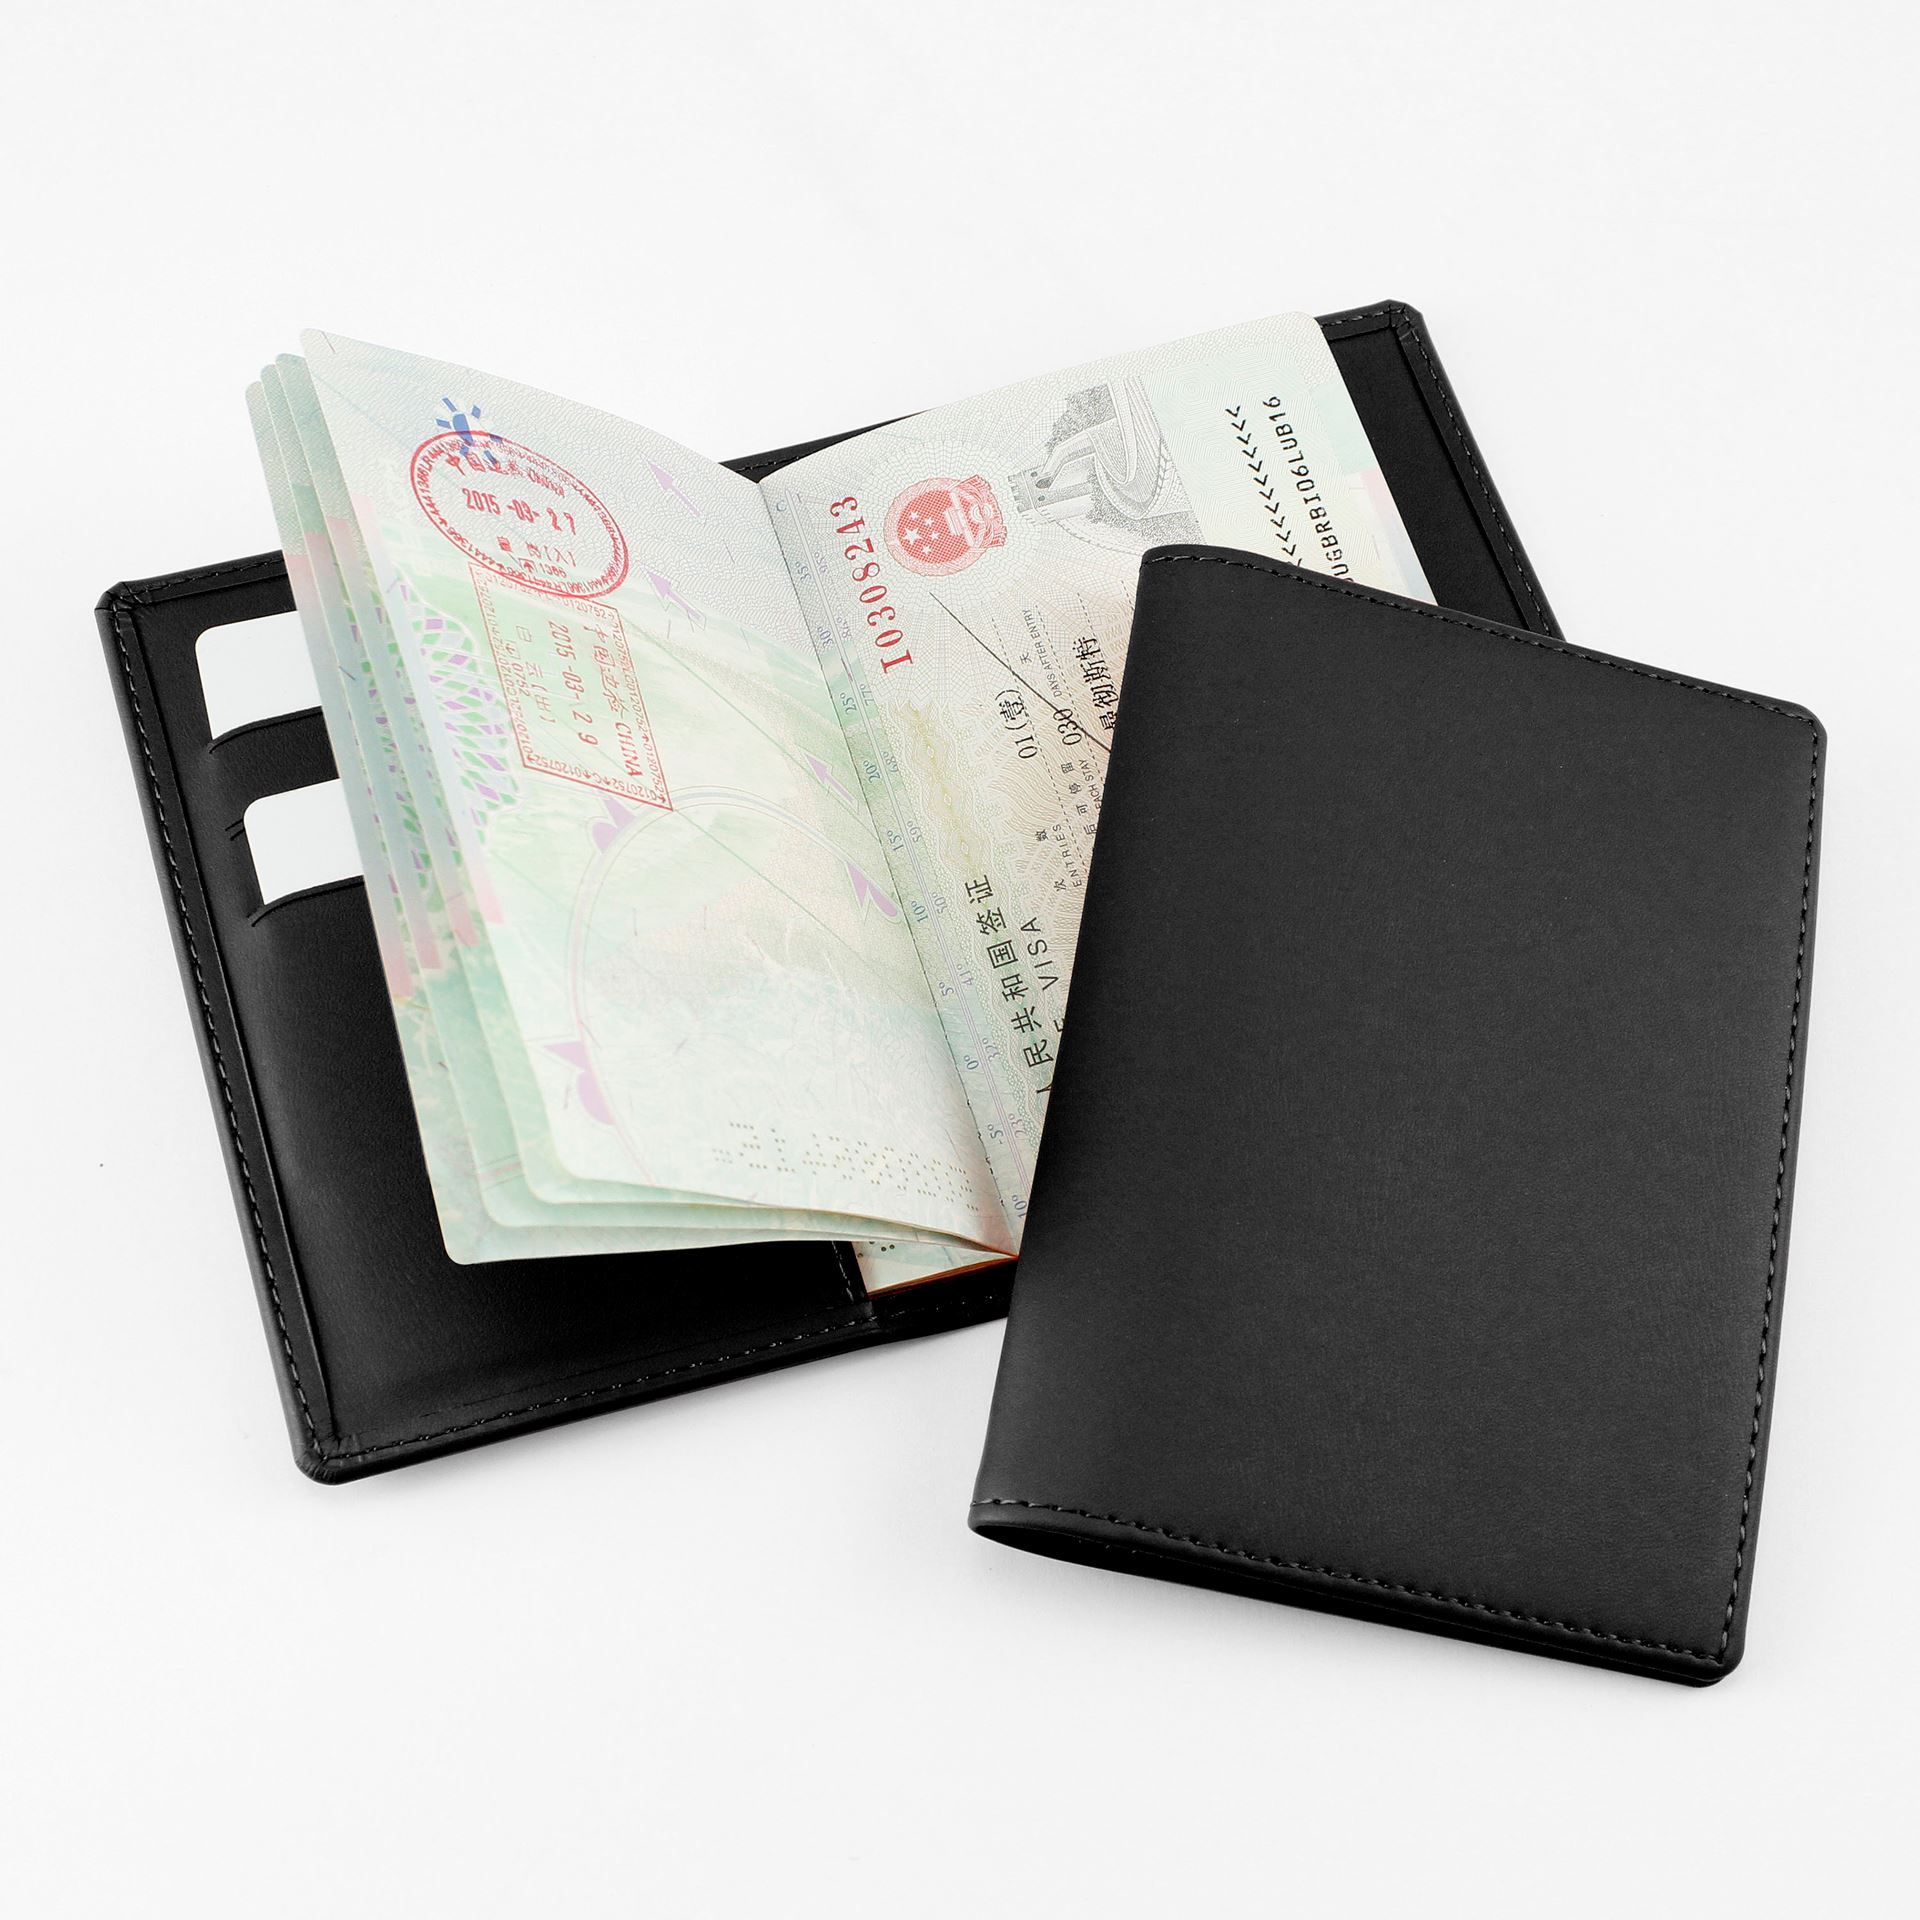 Porto Eco Express  Passport Case, in a Black or Navy.